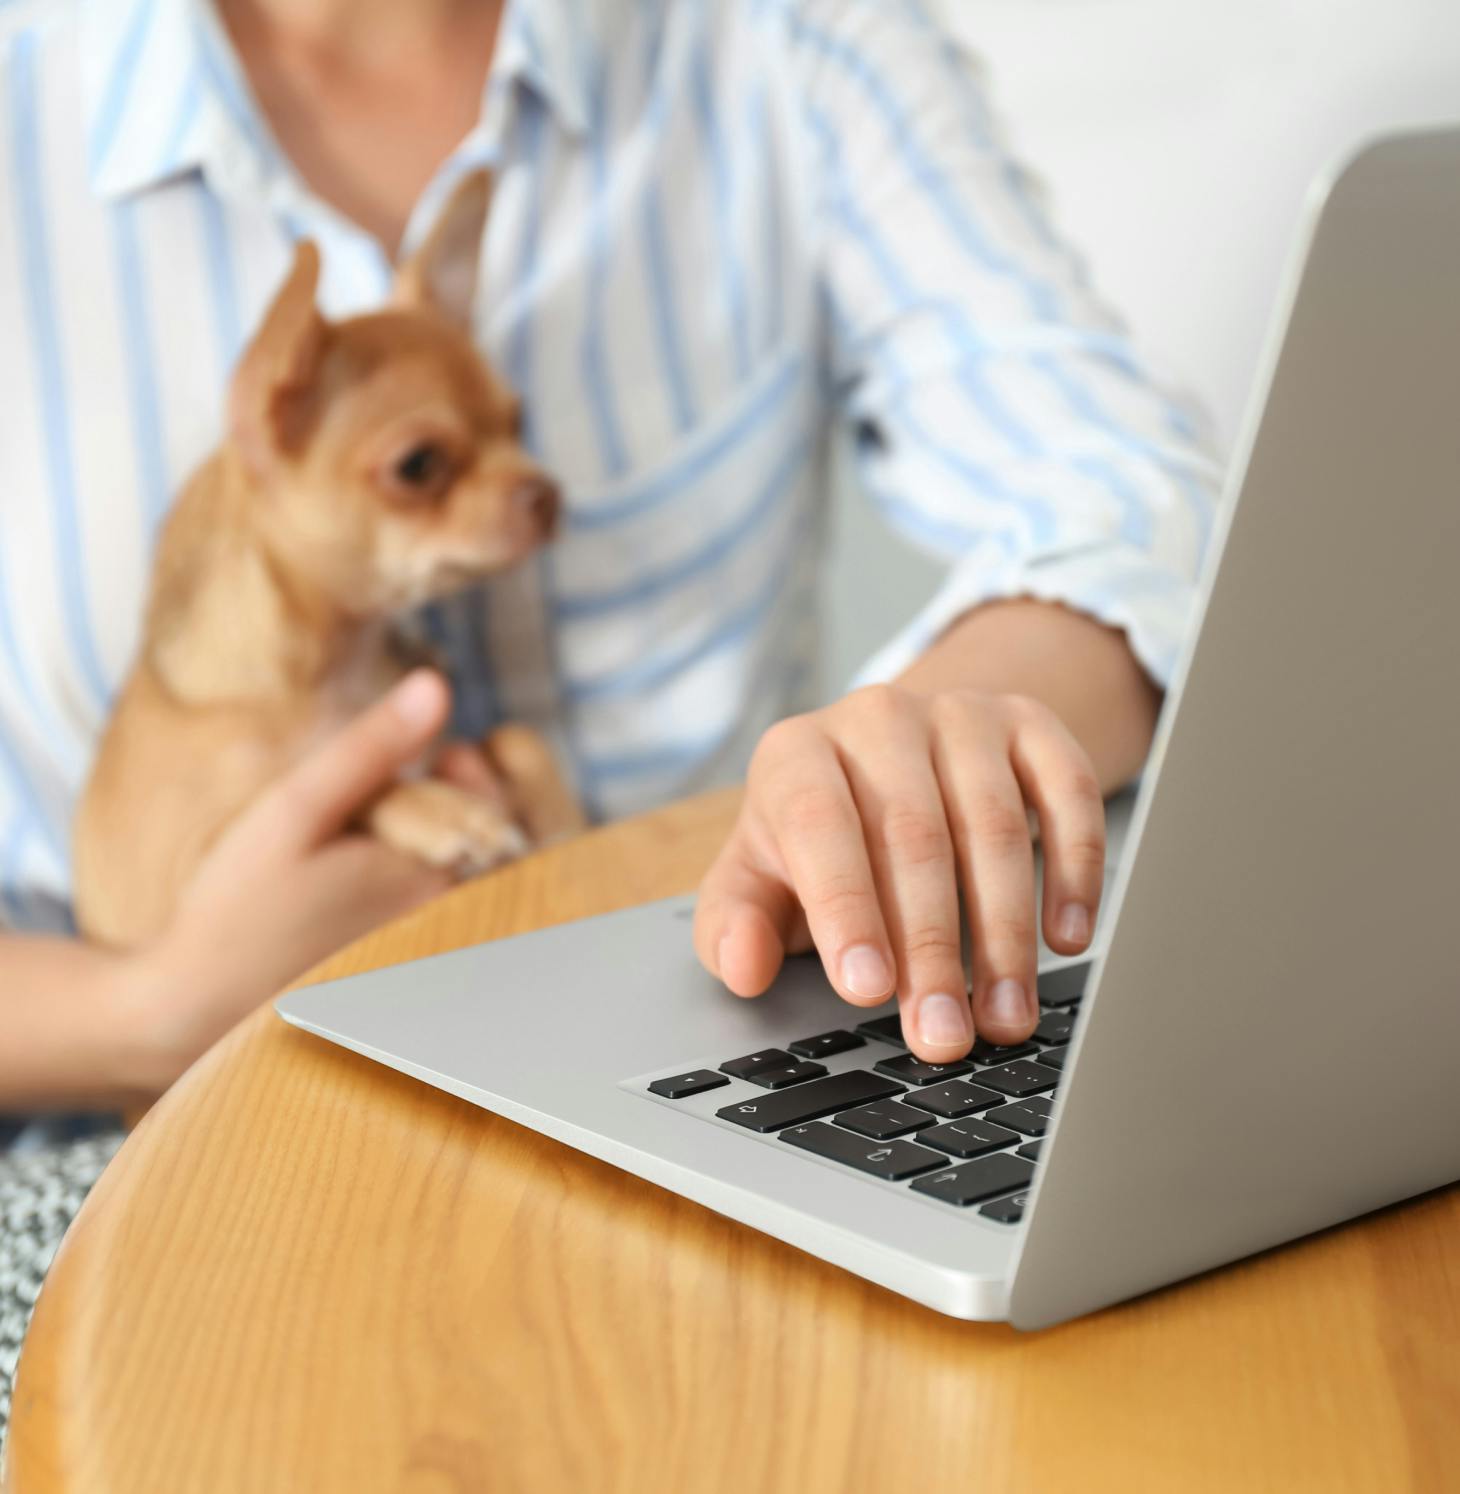 woman using a laptop with a Chihuahua on her lap